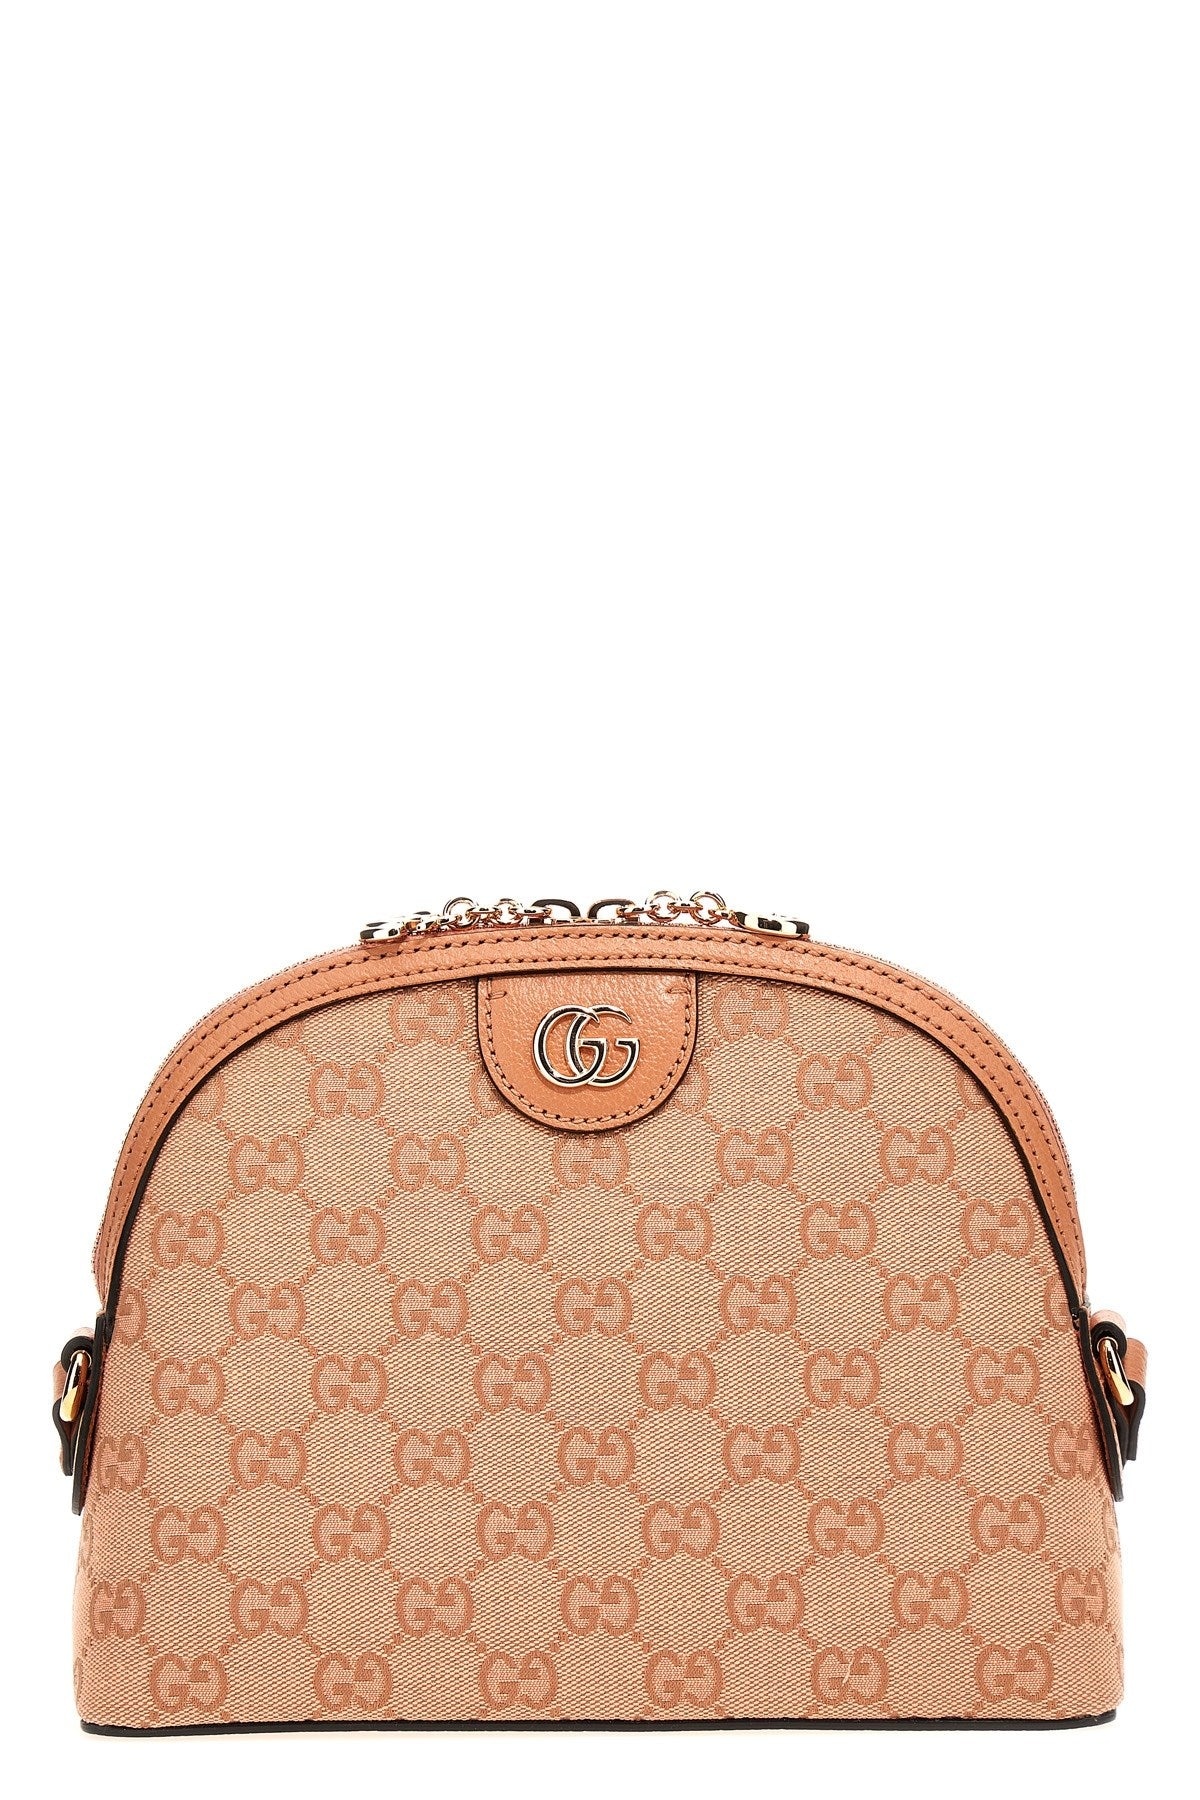 Gucci Women 'Ophidia Gg' Small Shoulder Bag - 1